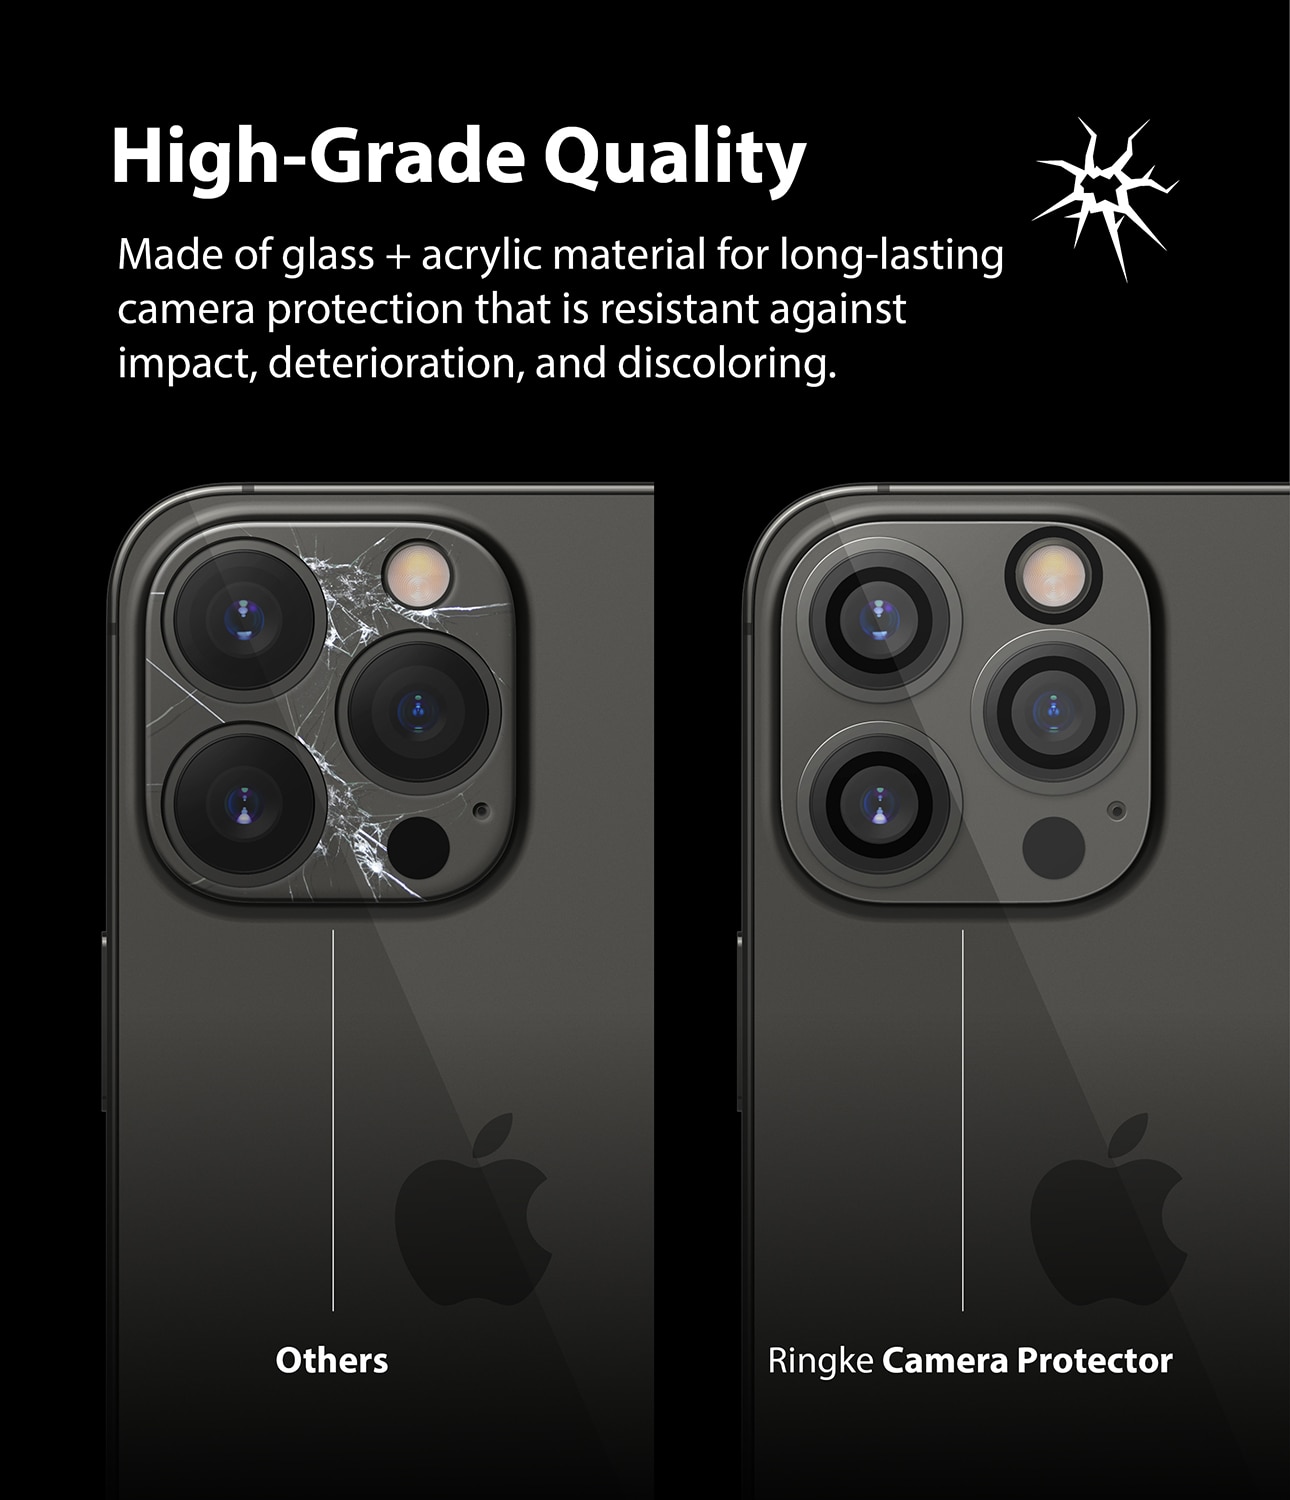 Camera Protector Glass (2 pièces) iPhone 13 Pro Max